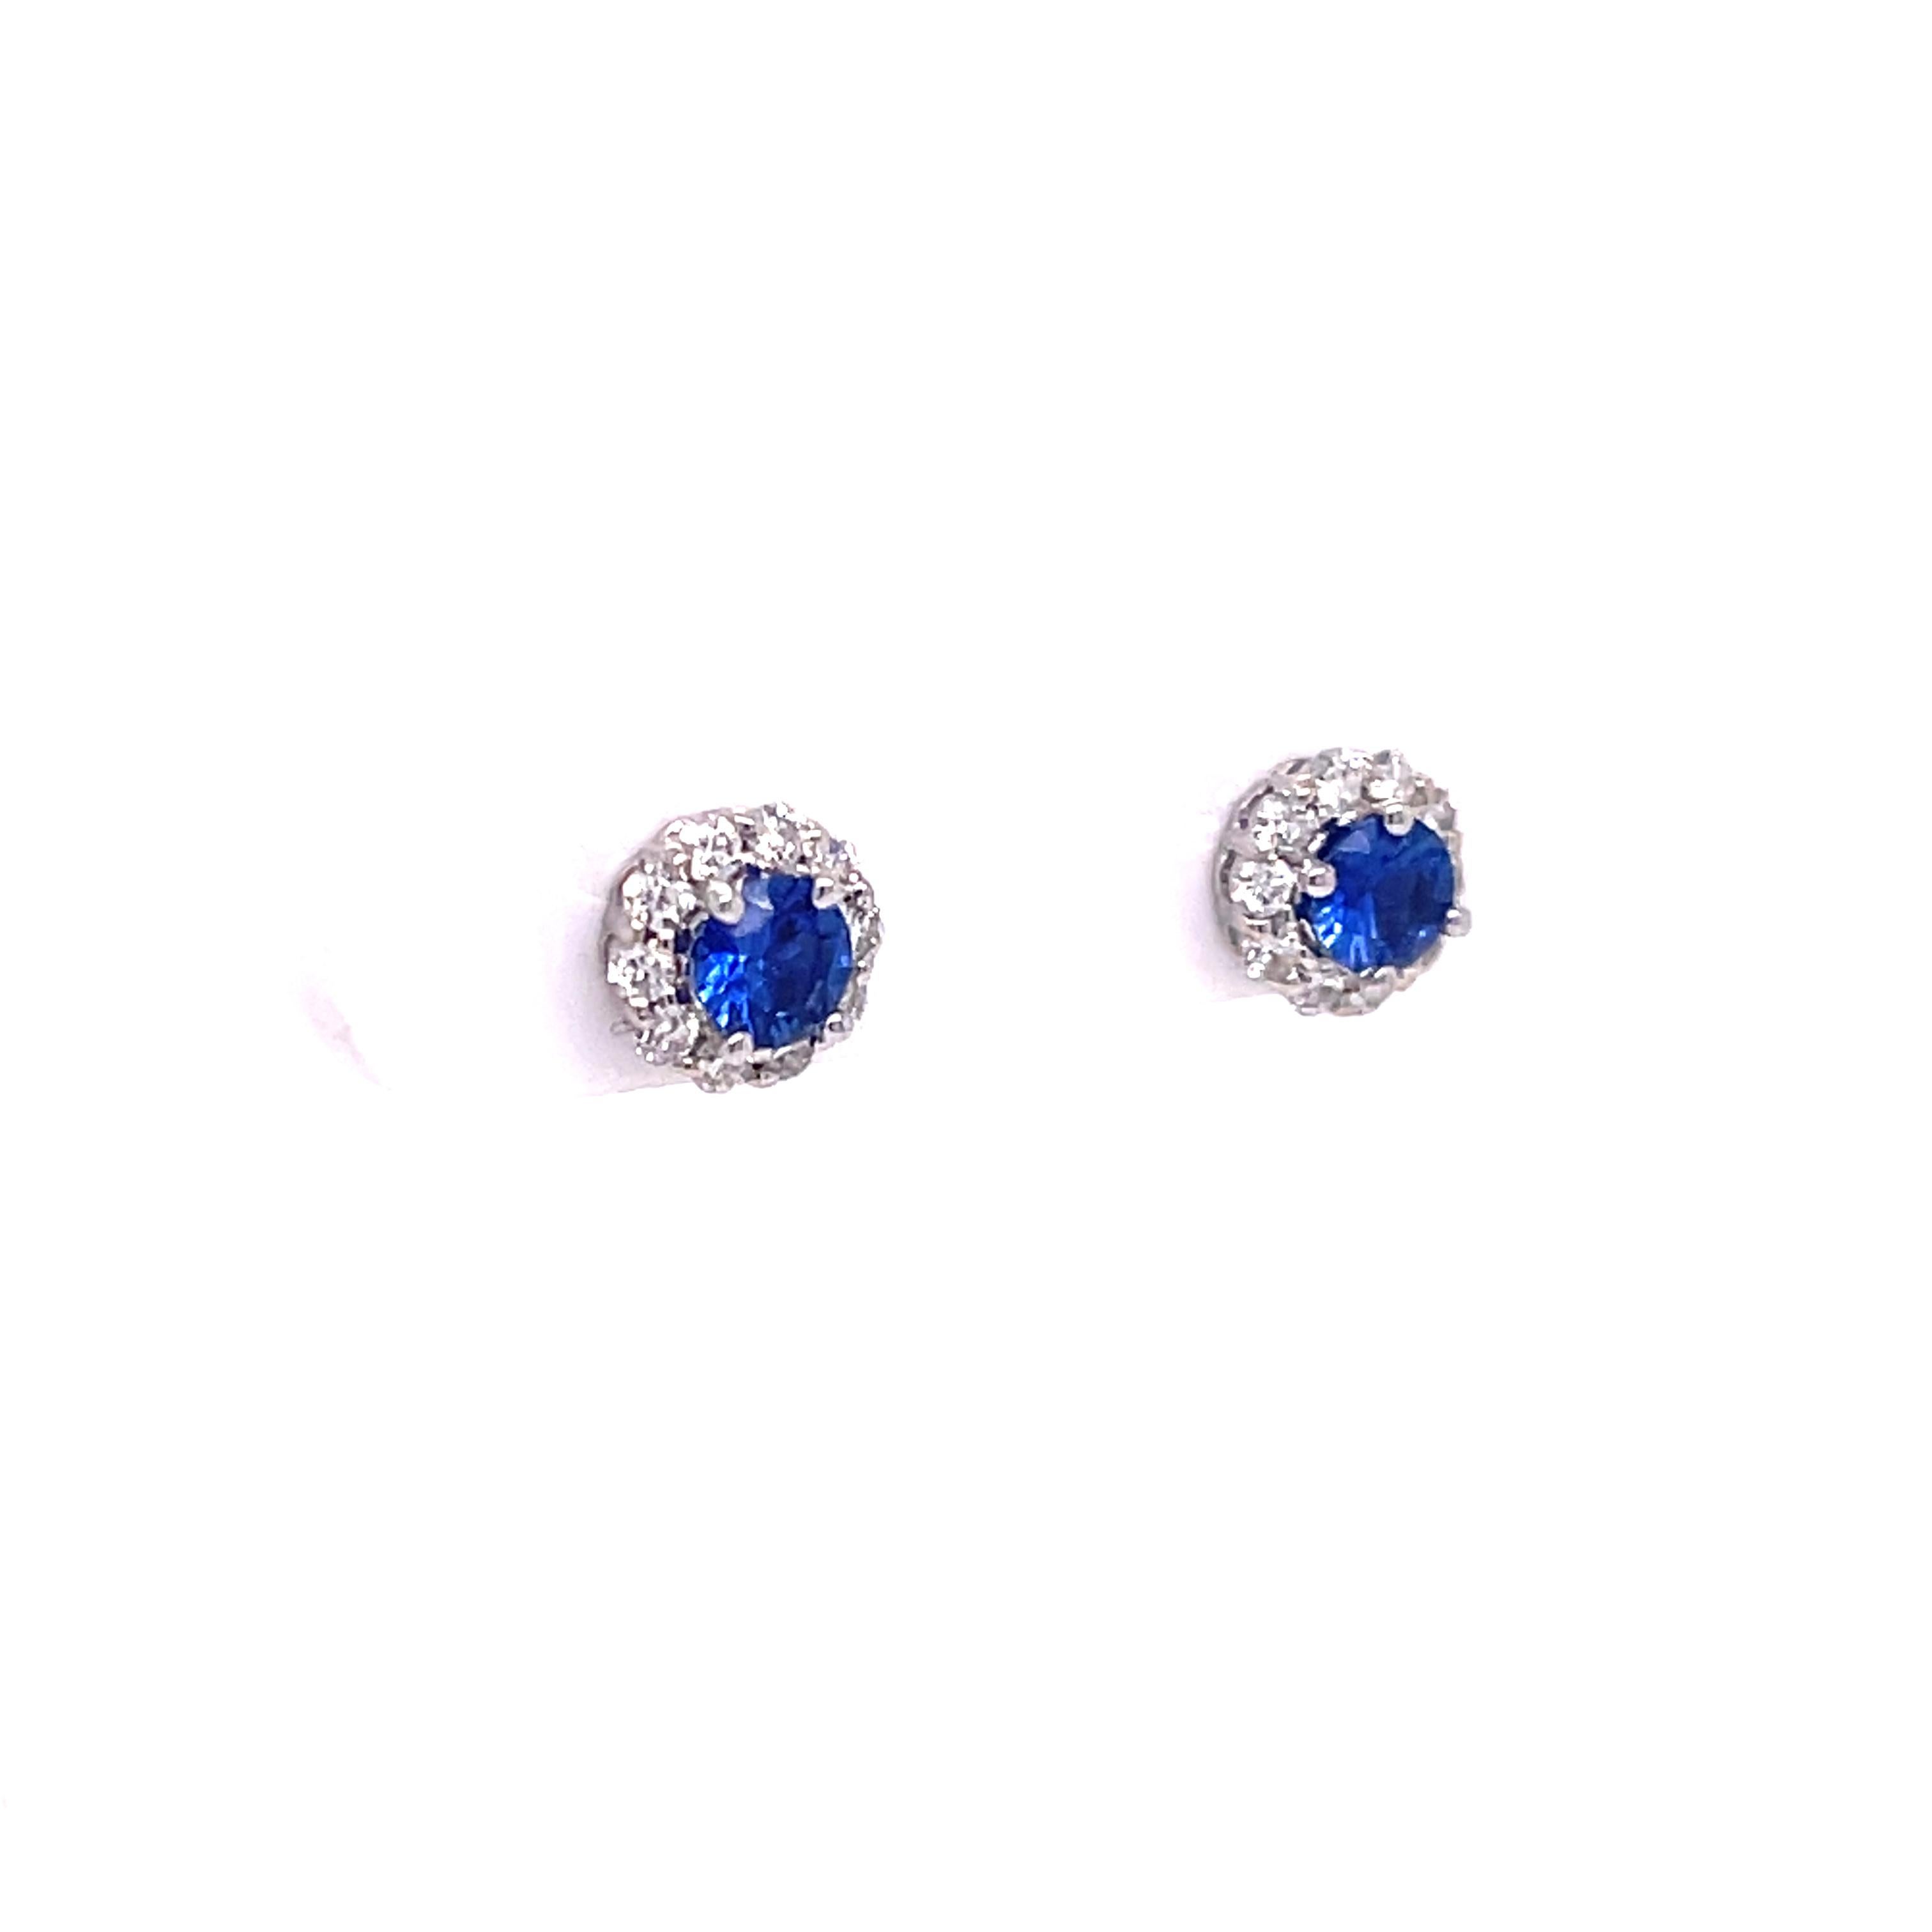 Sapphire and diamond studs in 14K white gold. The earrings feature 0.48ctw of round sapphires with halos of 0.27ctw round diamonds. 